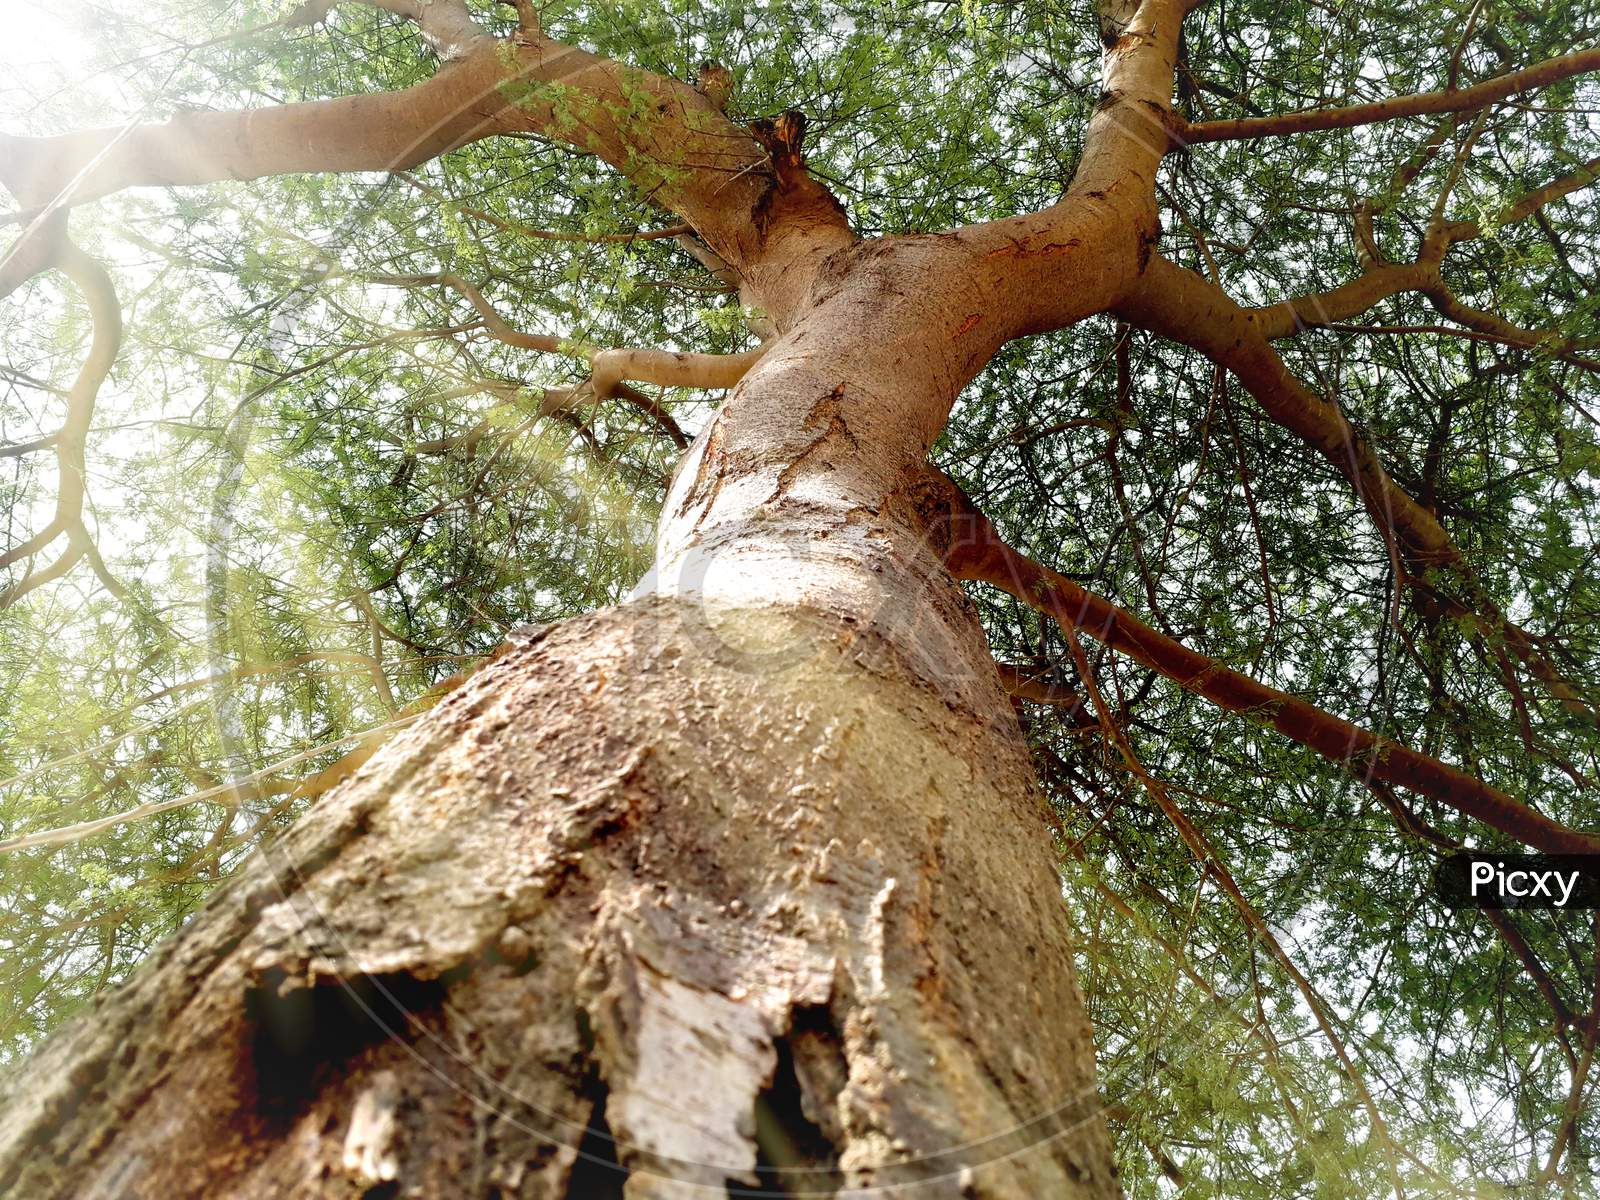 Bottom View Of A Large Tree Near Trunk With Coming Sunlight Through Leaves Or Tyndall Effect